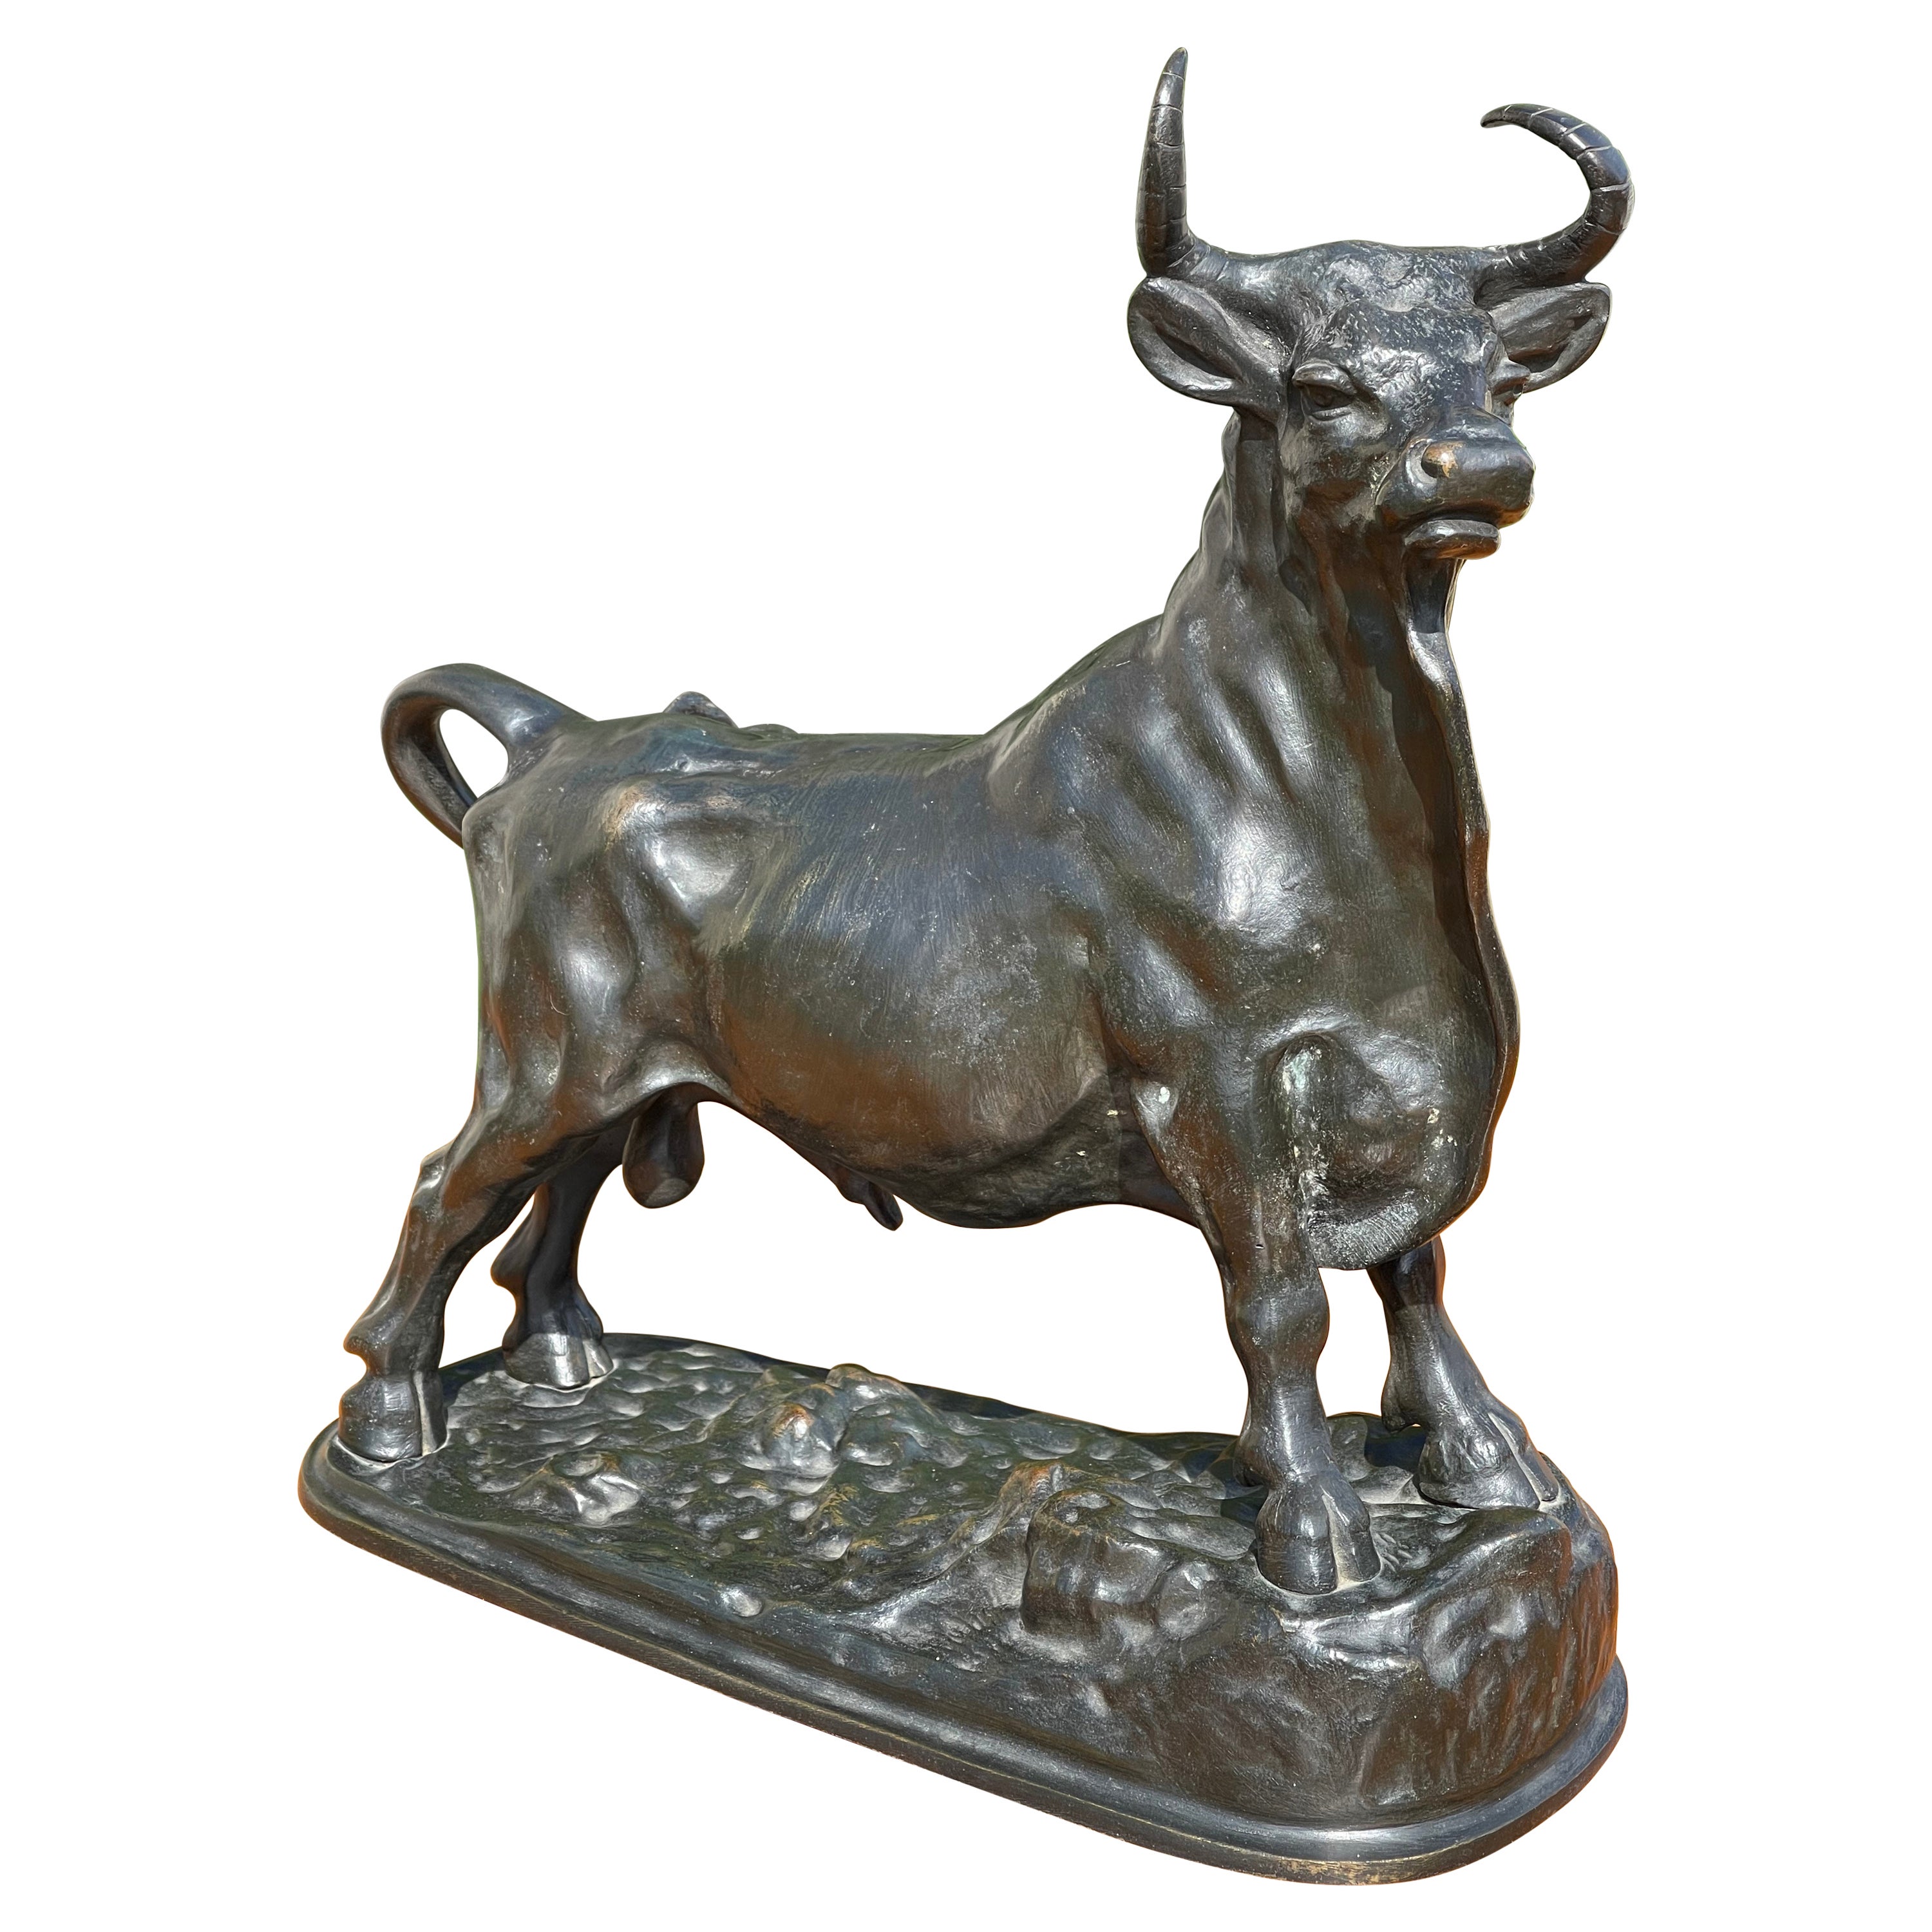 Assigned to A. Clesinger, Bronze " Roman Bull " with Brown Patina, 19th Century